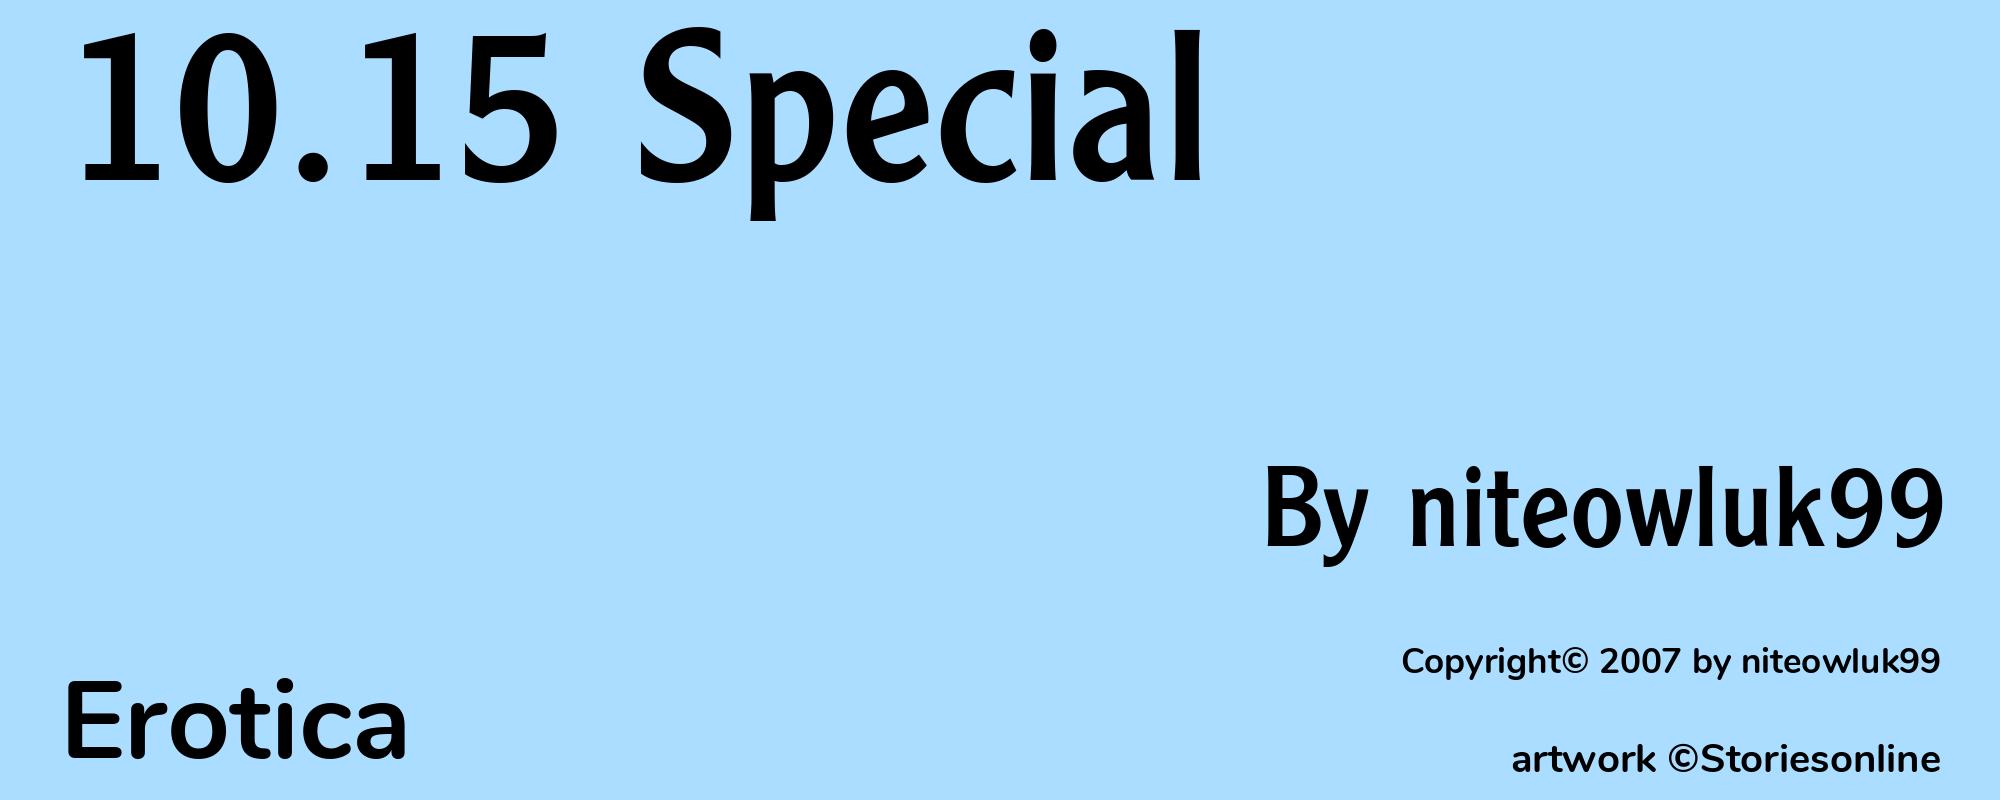 10.15 Special - Cover